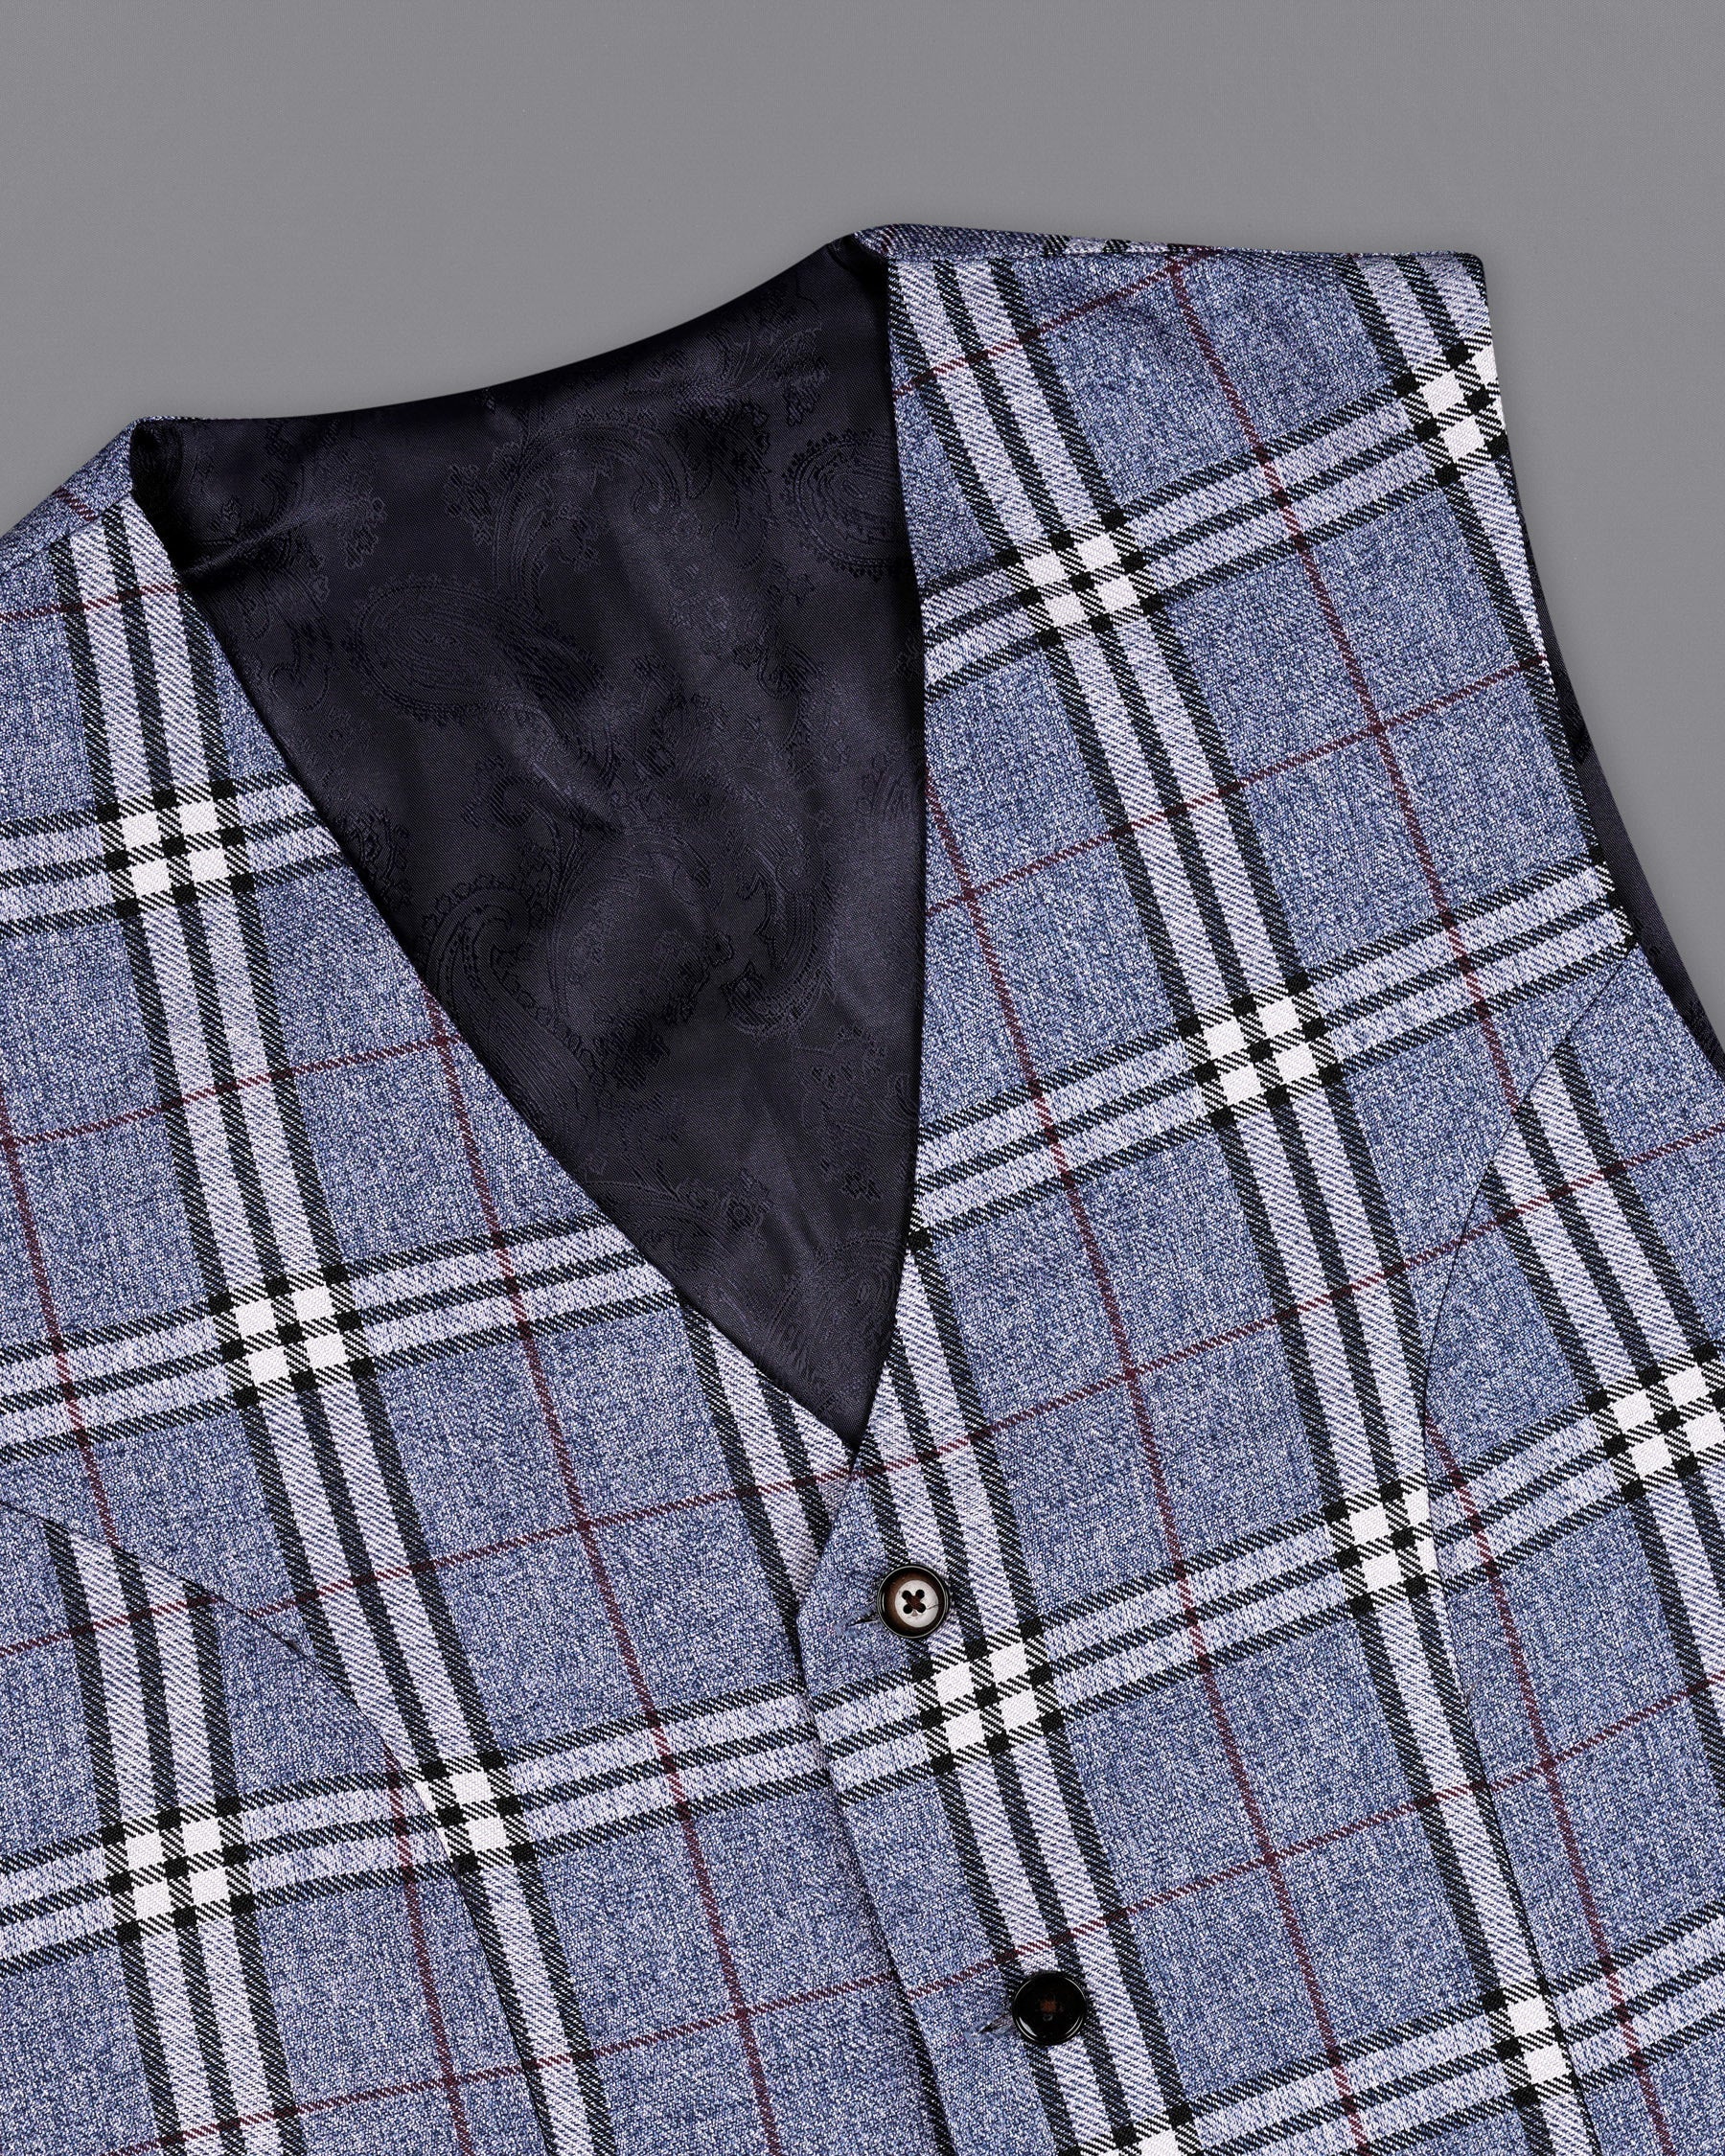 Fiord Blue Plaid Double Breasted Suit  ST2154-DB-36, ST2154-DB-38, ST2154-DB-40, ST2154-DB-42, ST2154-DB-44, ST2154-DB-46, ST2154-DB-48, ST2154-DB-50, ST2154-DB-52, ST2154-DB-54, ST2154-DB-56, ST2154-DB-58, ST2154-DB-60